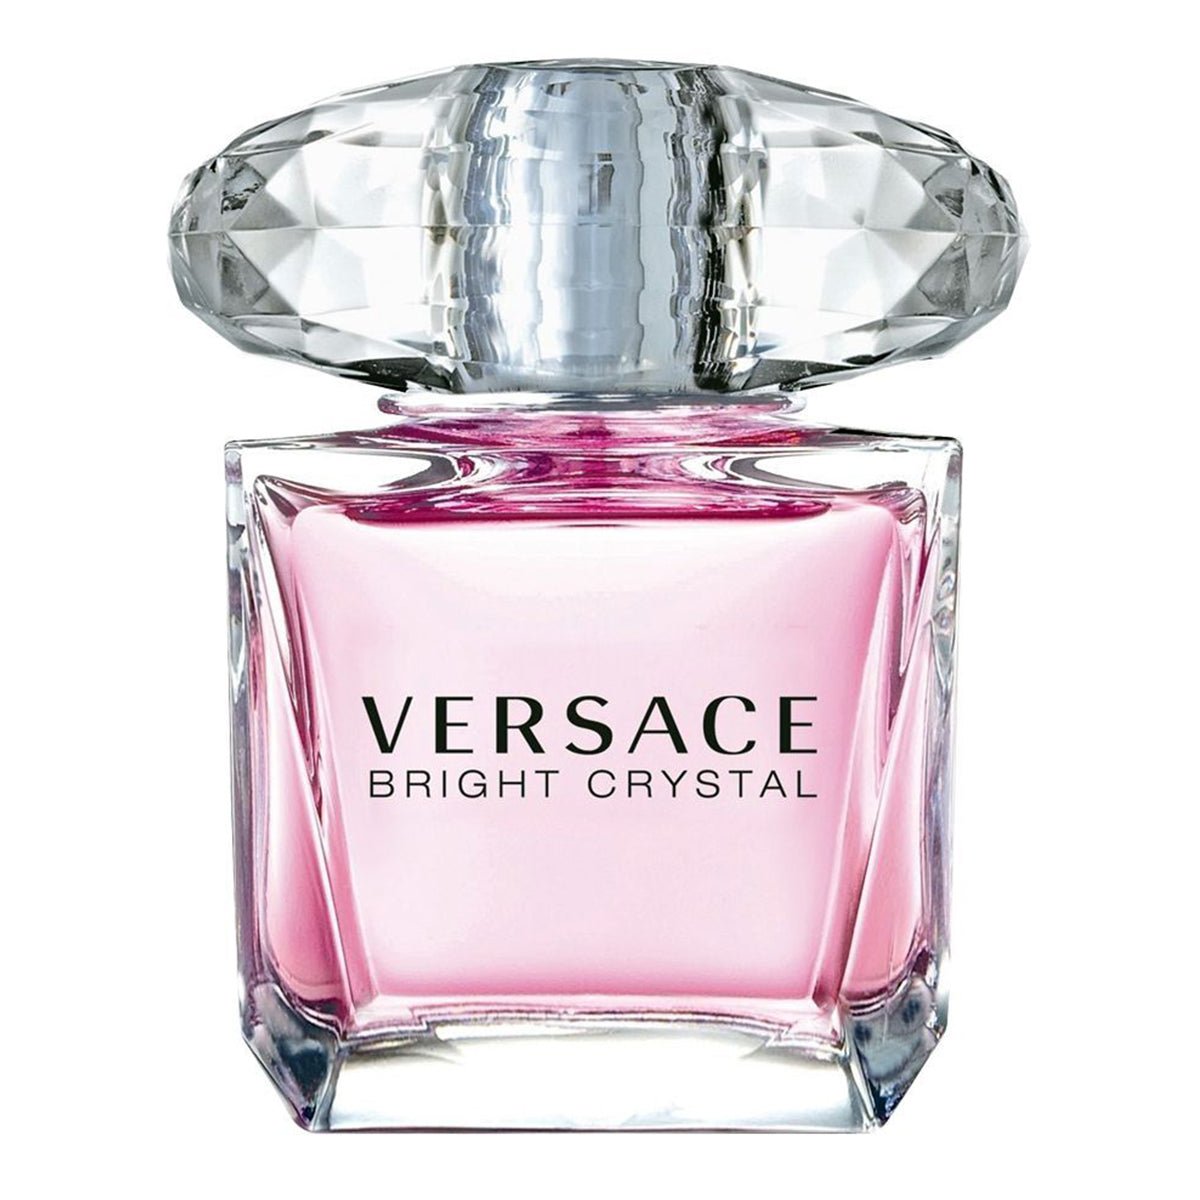 Versace Bright Crystal Edt For Women 200ml-Perfume - AllurebeautypkVersace Bright Crystal Edt For Women 200ml-Perfume